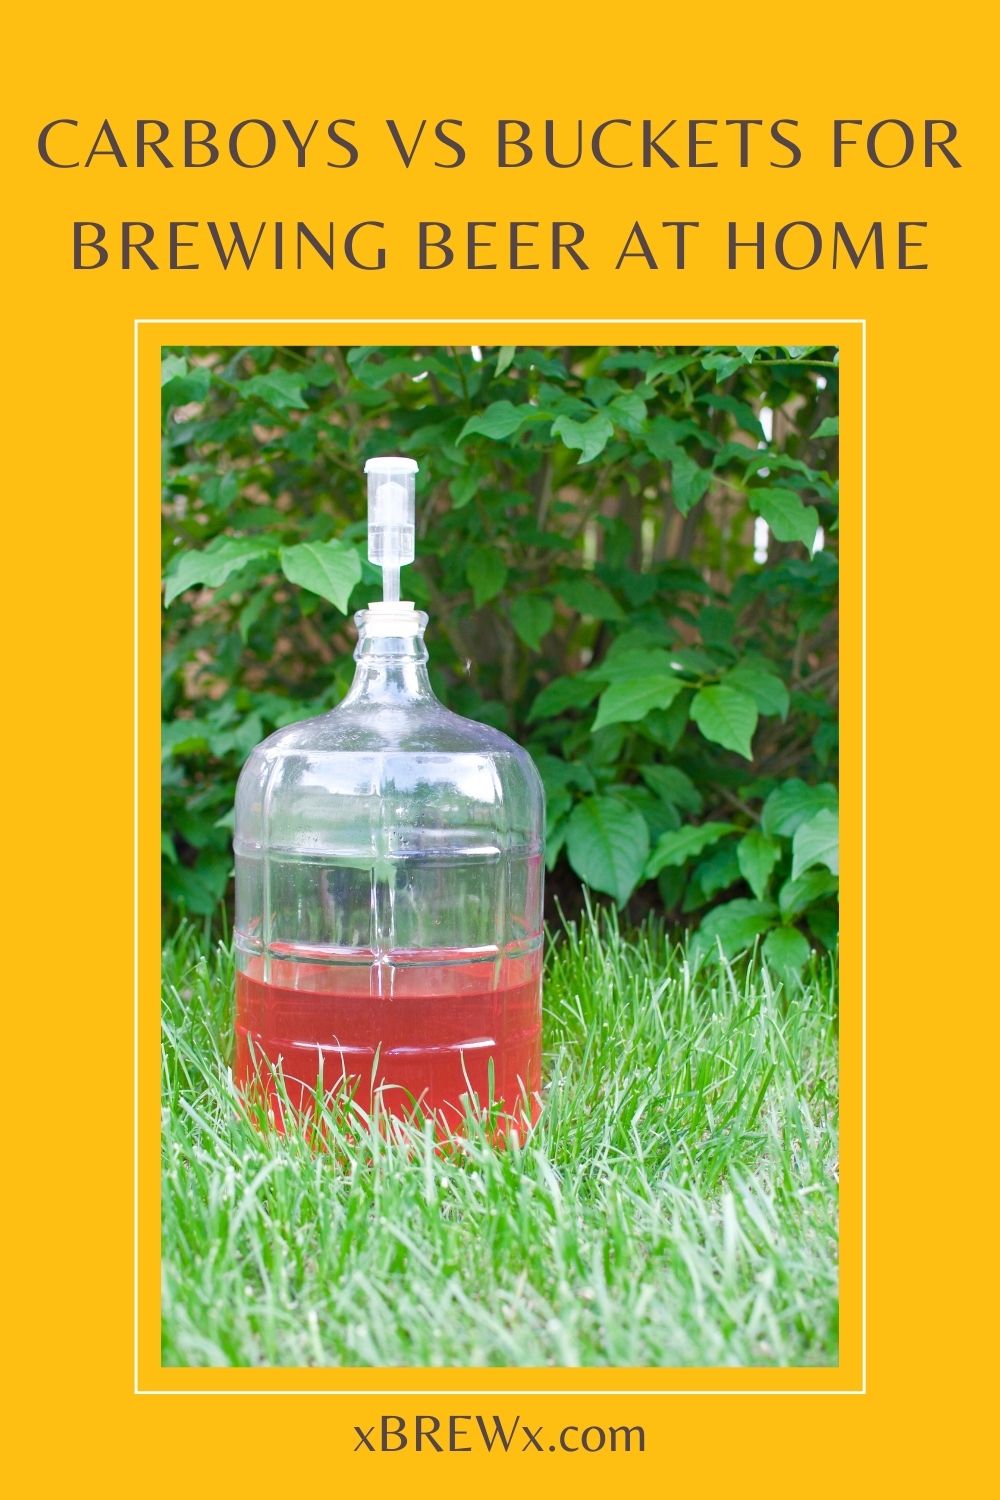 5-gallon clear glass carboy with bubbler and green leaves in the background. Image has text overlay which says, "carboys vs buckets for brewing beer at home".